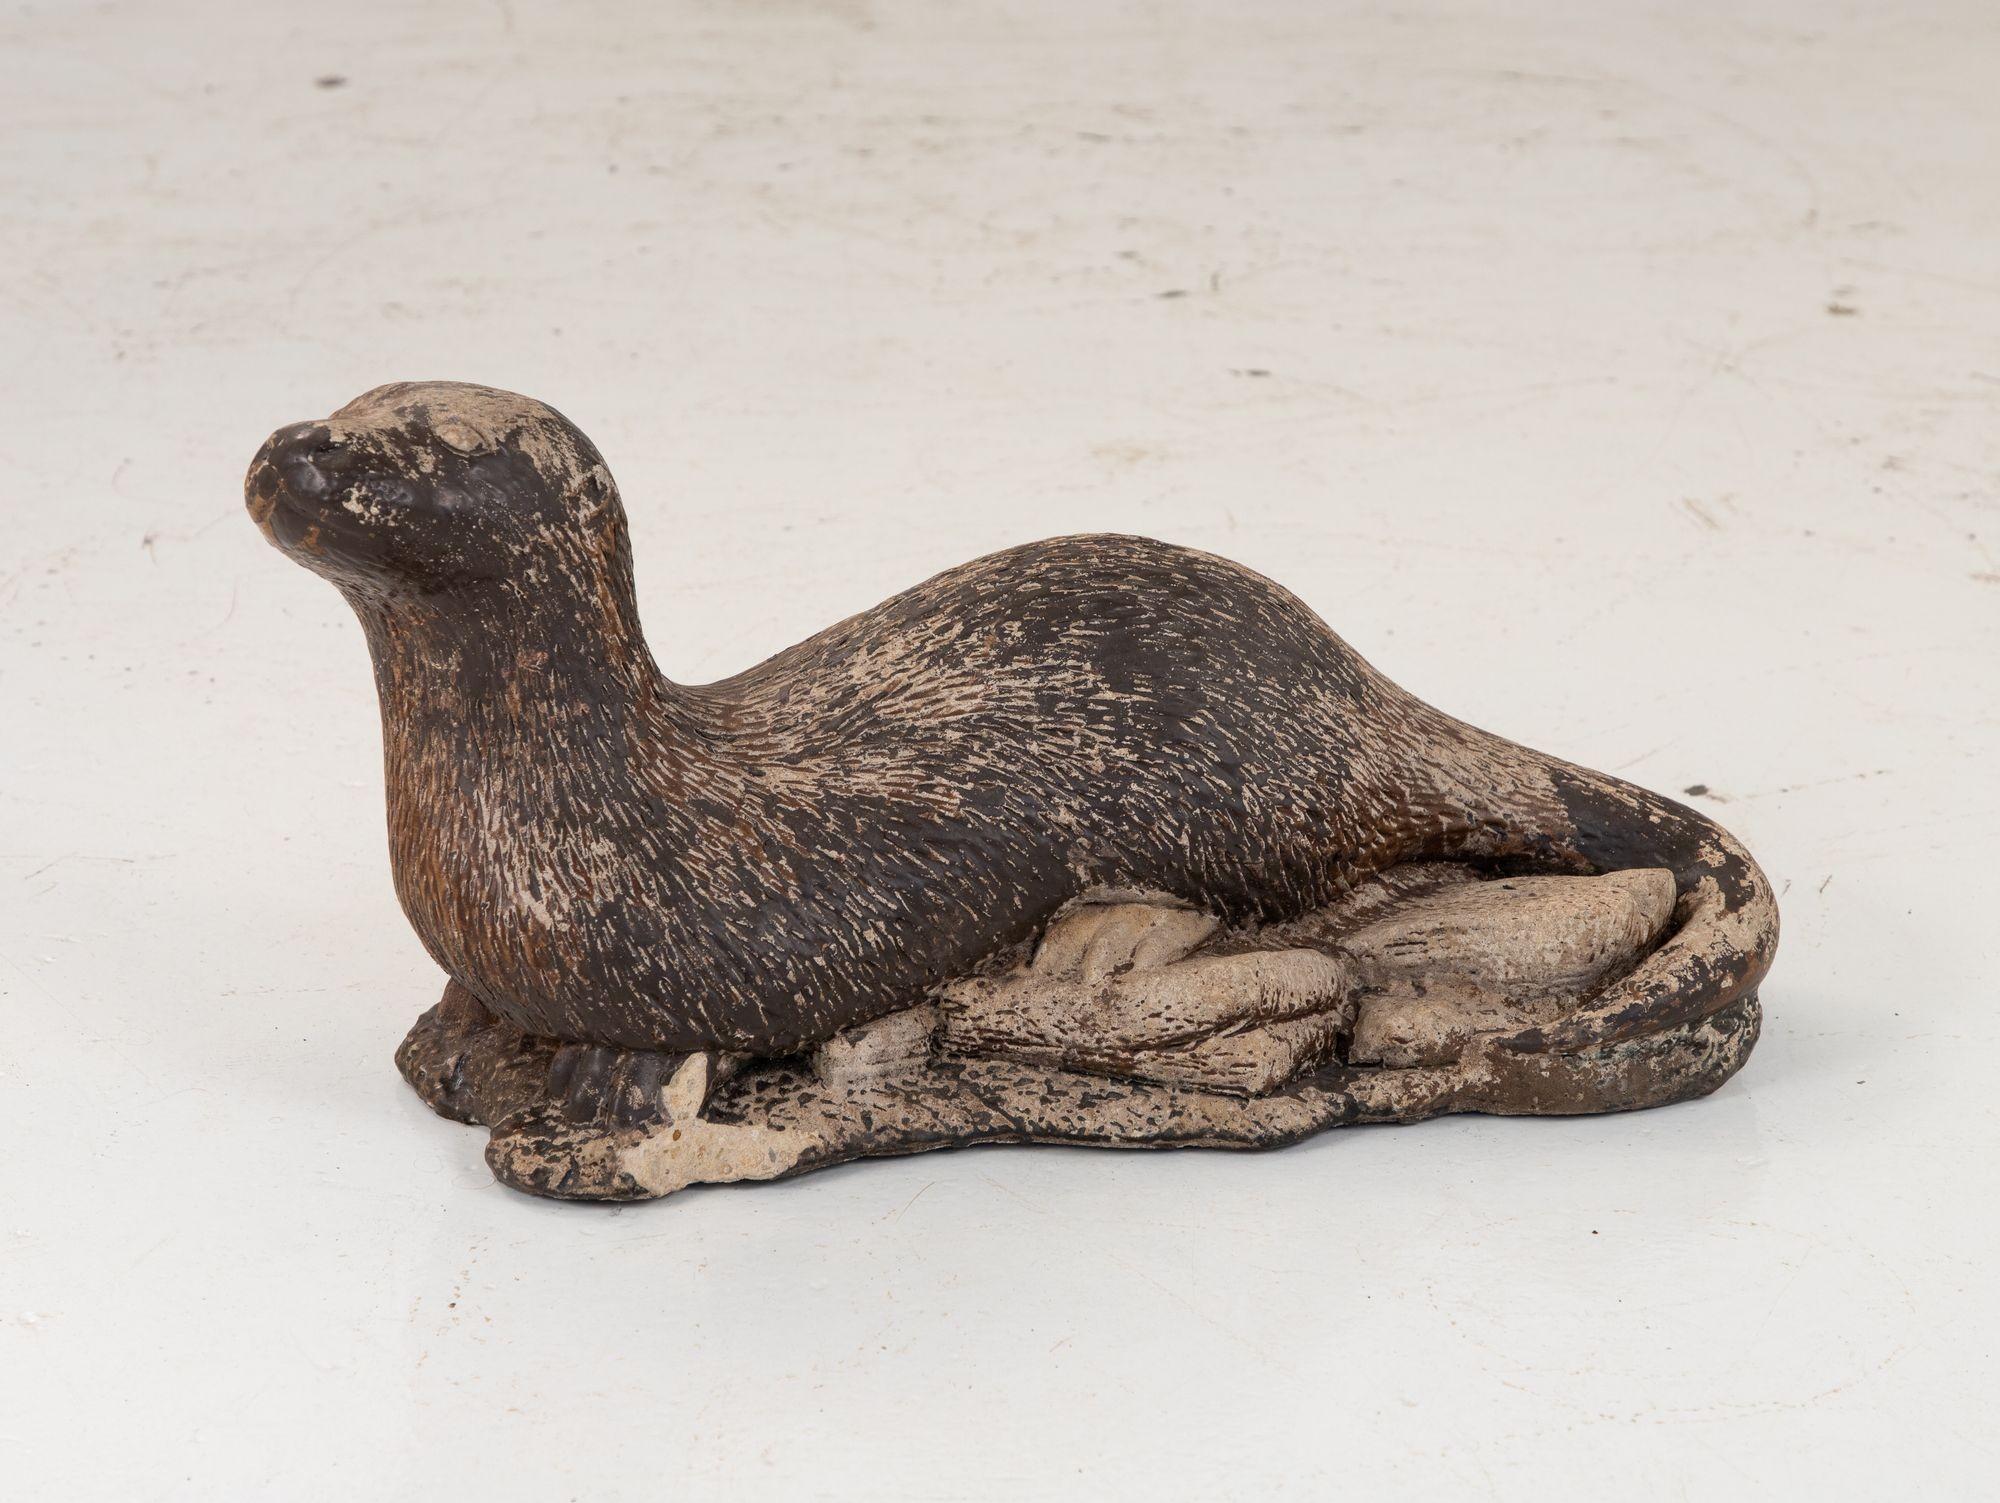 A mid 20th century cast stone English garden ornament in the shape of an otter. The lifelike detail in the coat and the face make for a wonderful example of a classic English garden ornament. The otter retains much of its original brown paint. Some